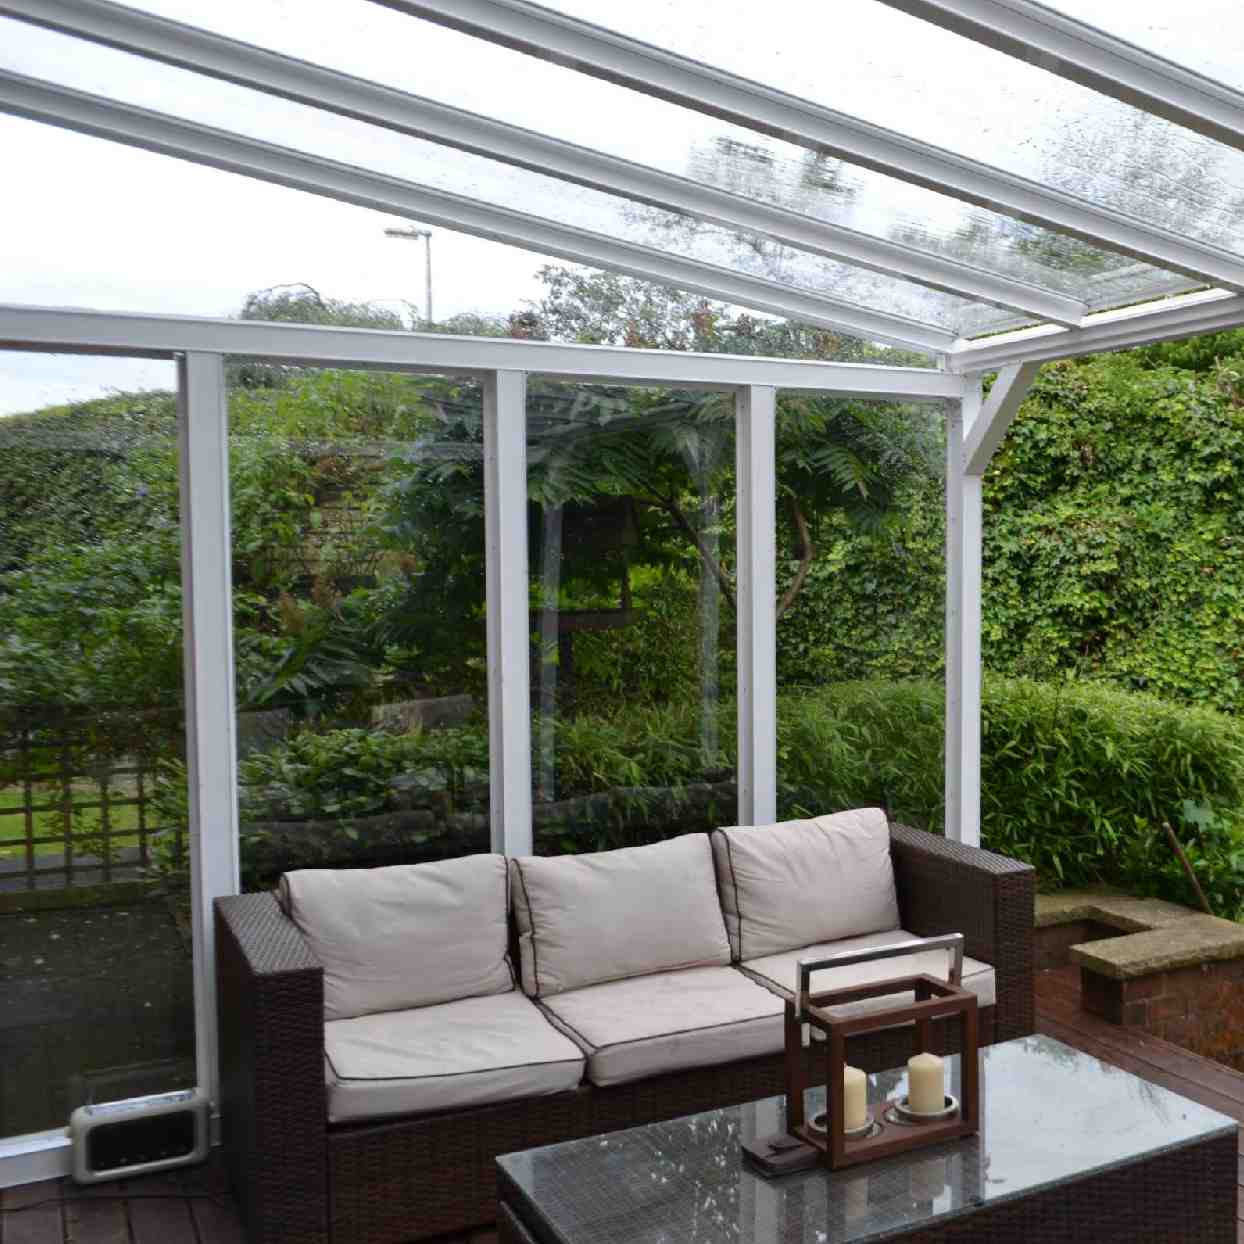 Buy Omega Verandah White with 6mm Glass Clear Plate Polycarbonate Glazing - 6.3m (W) x 3.0m (P), (4) Supporting Posts online today